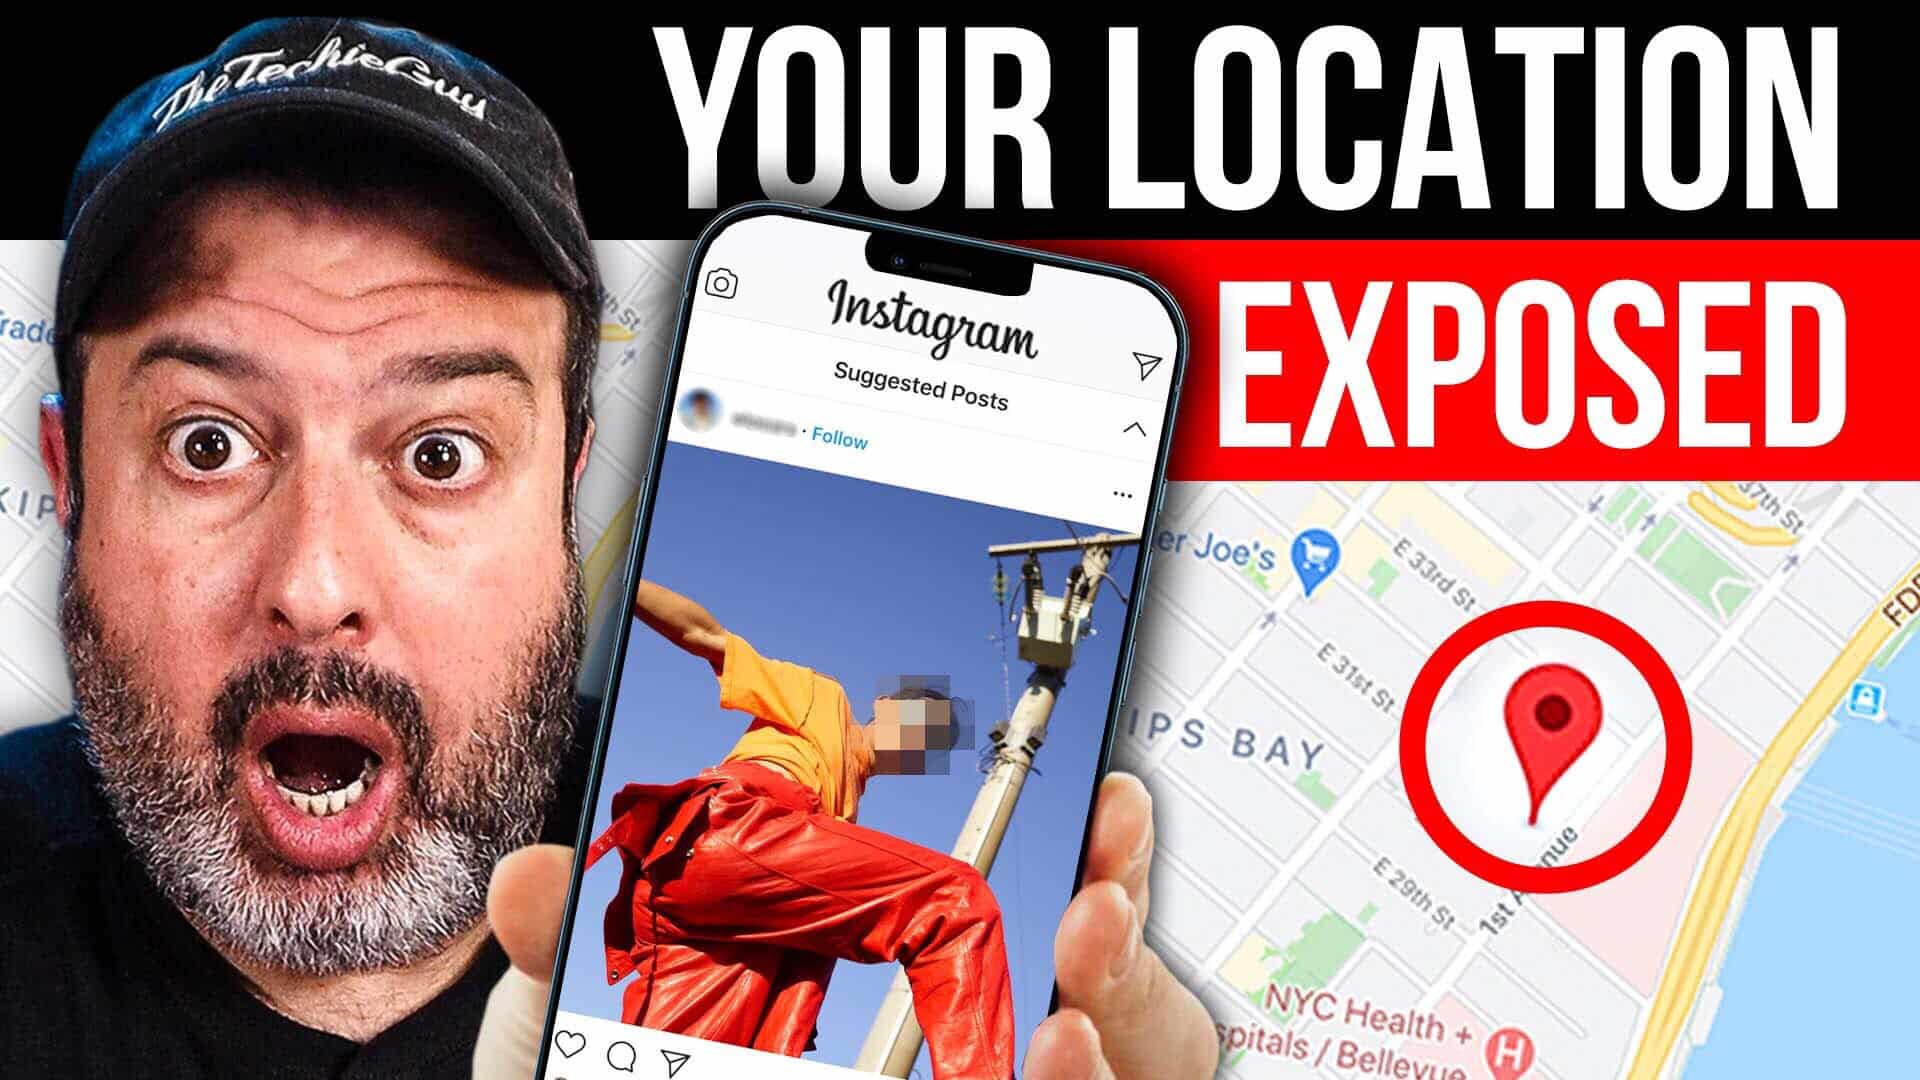 Can you track someone’s location from a photo you post on social media?